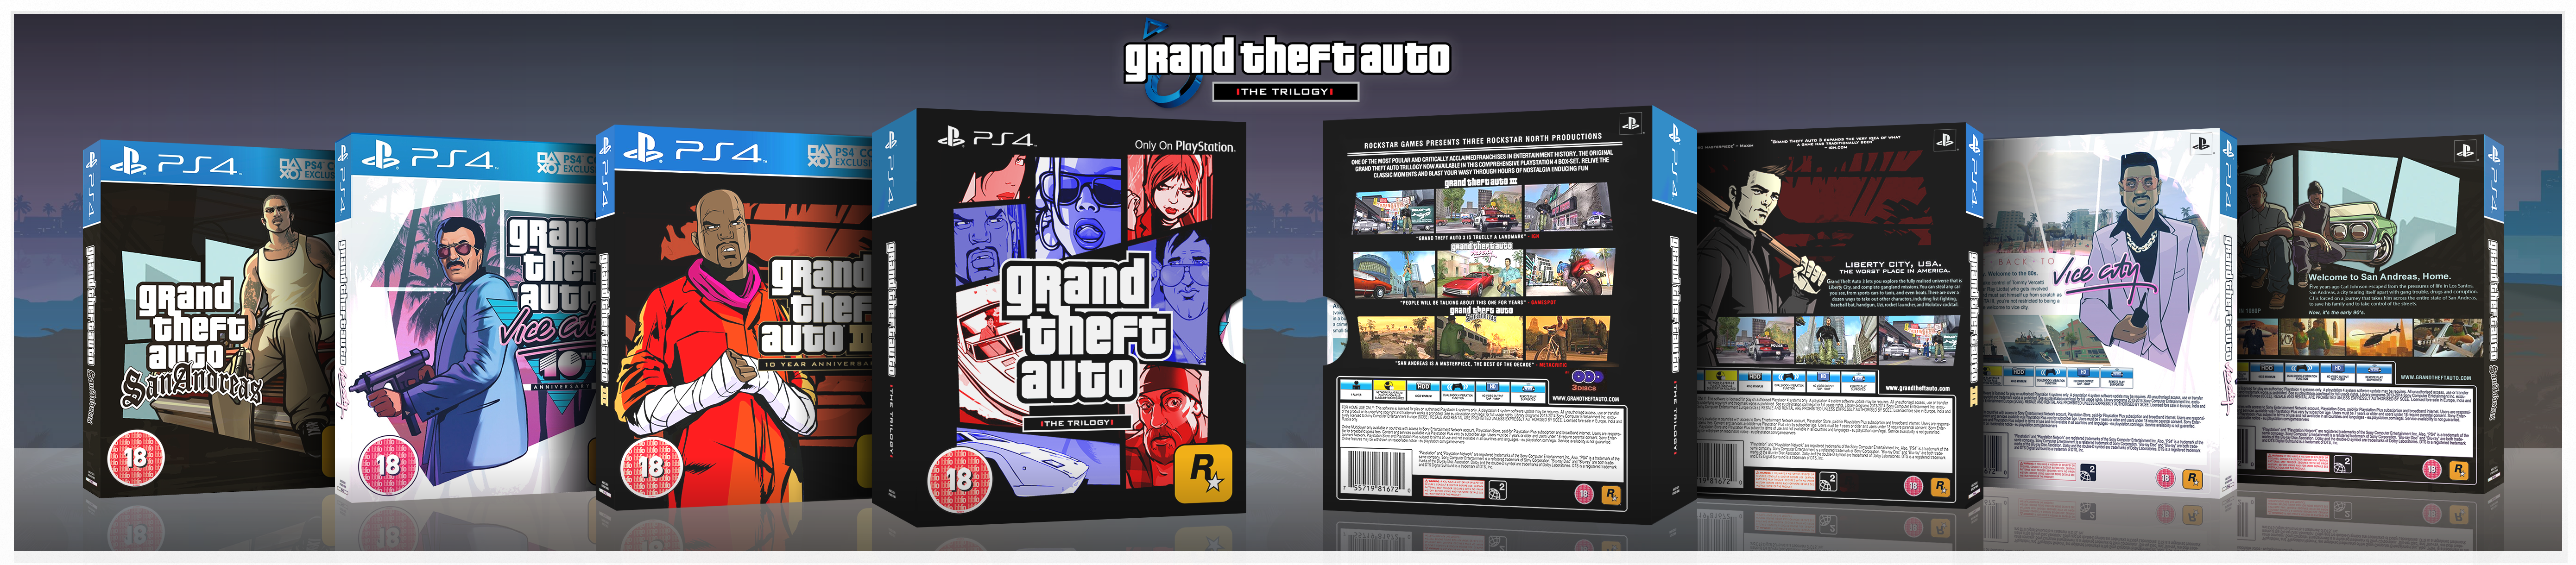 grand theft auto the trilogy the definitive edition nintendo switch download free